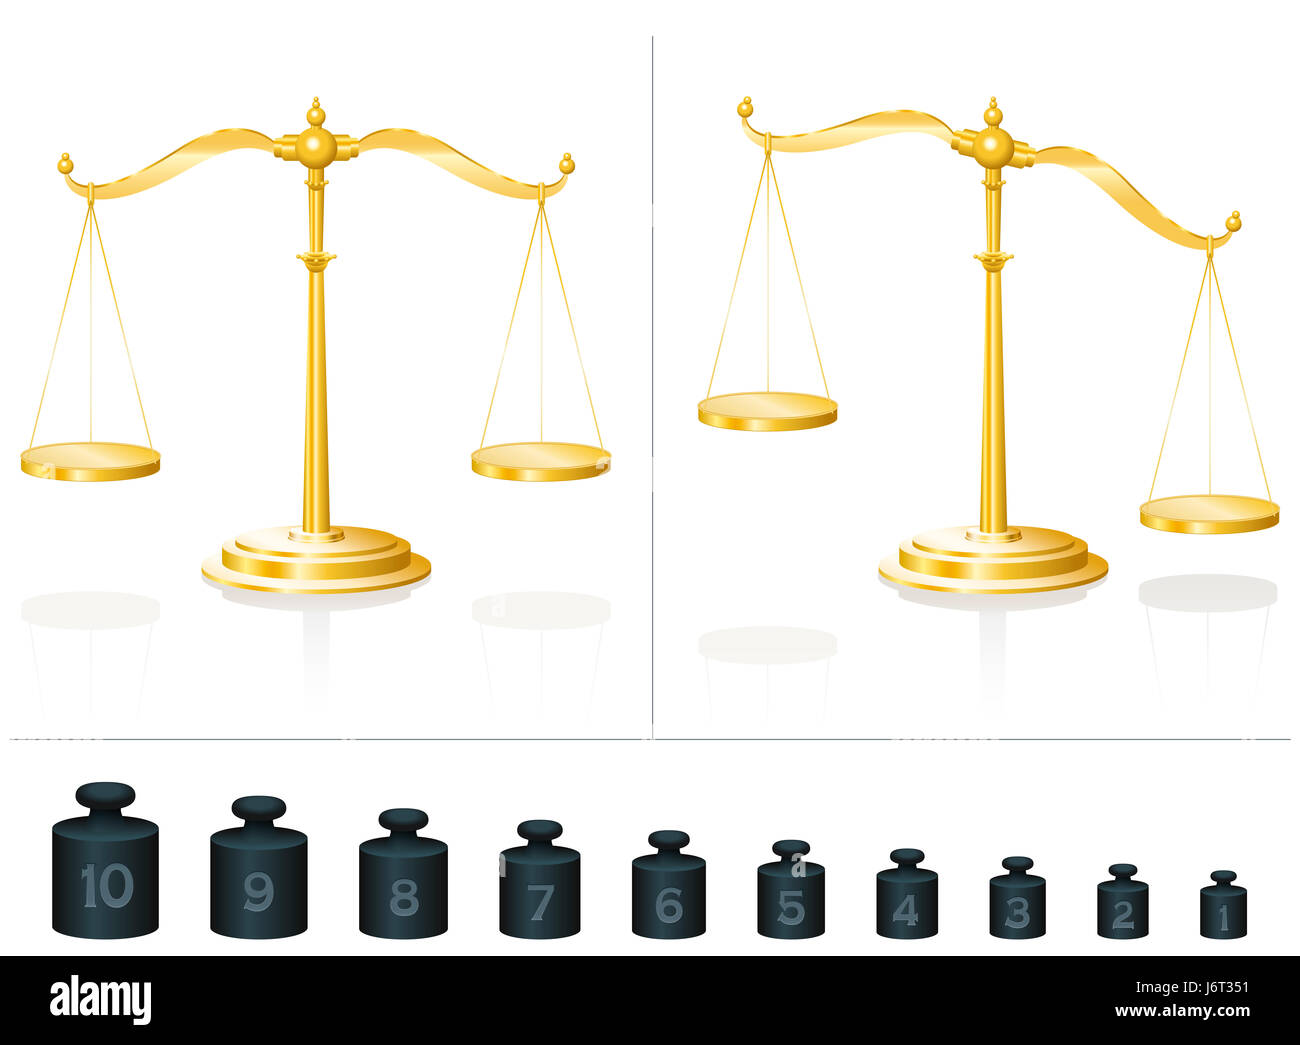 Scale for maths and physics - calculate with ten different weights and learn counting and addition - place them on the balanced or unbalanced pans. Stock Photo